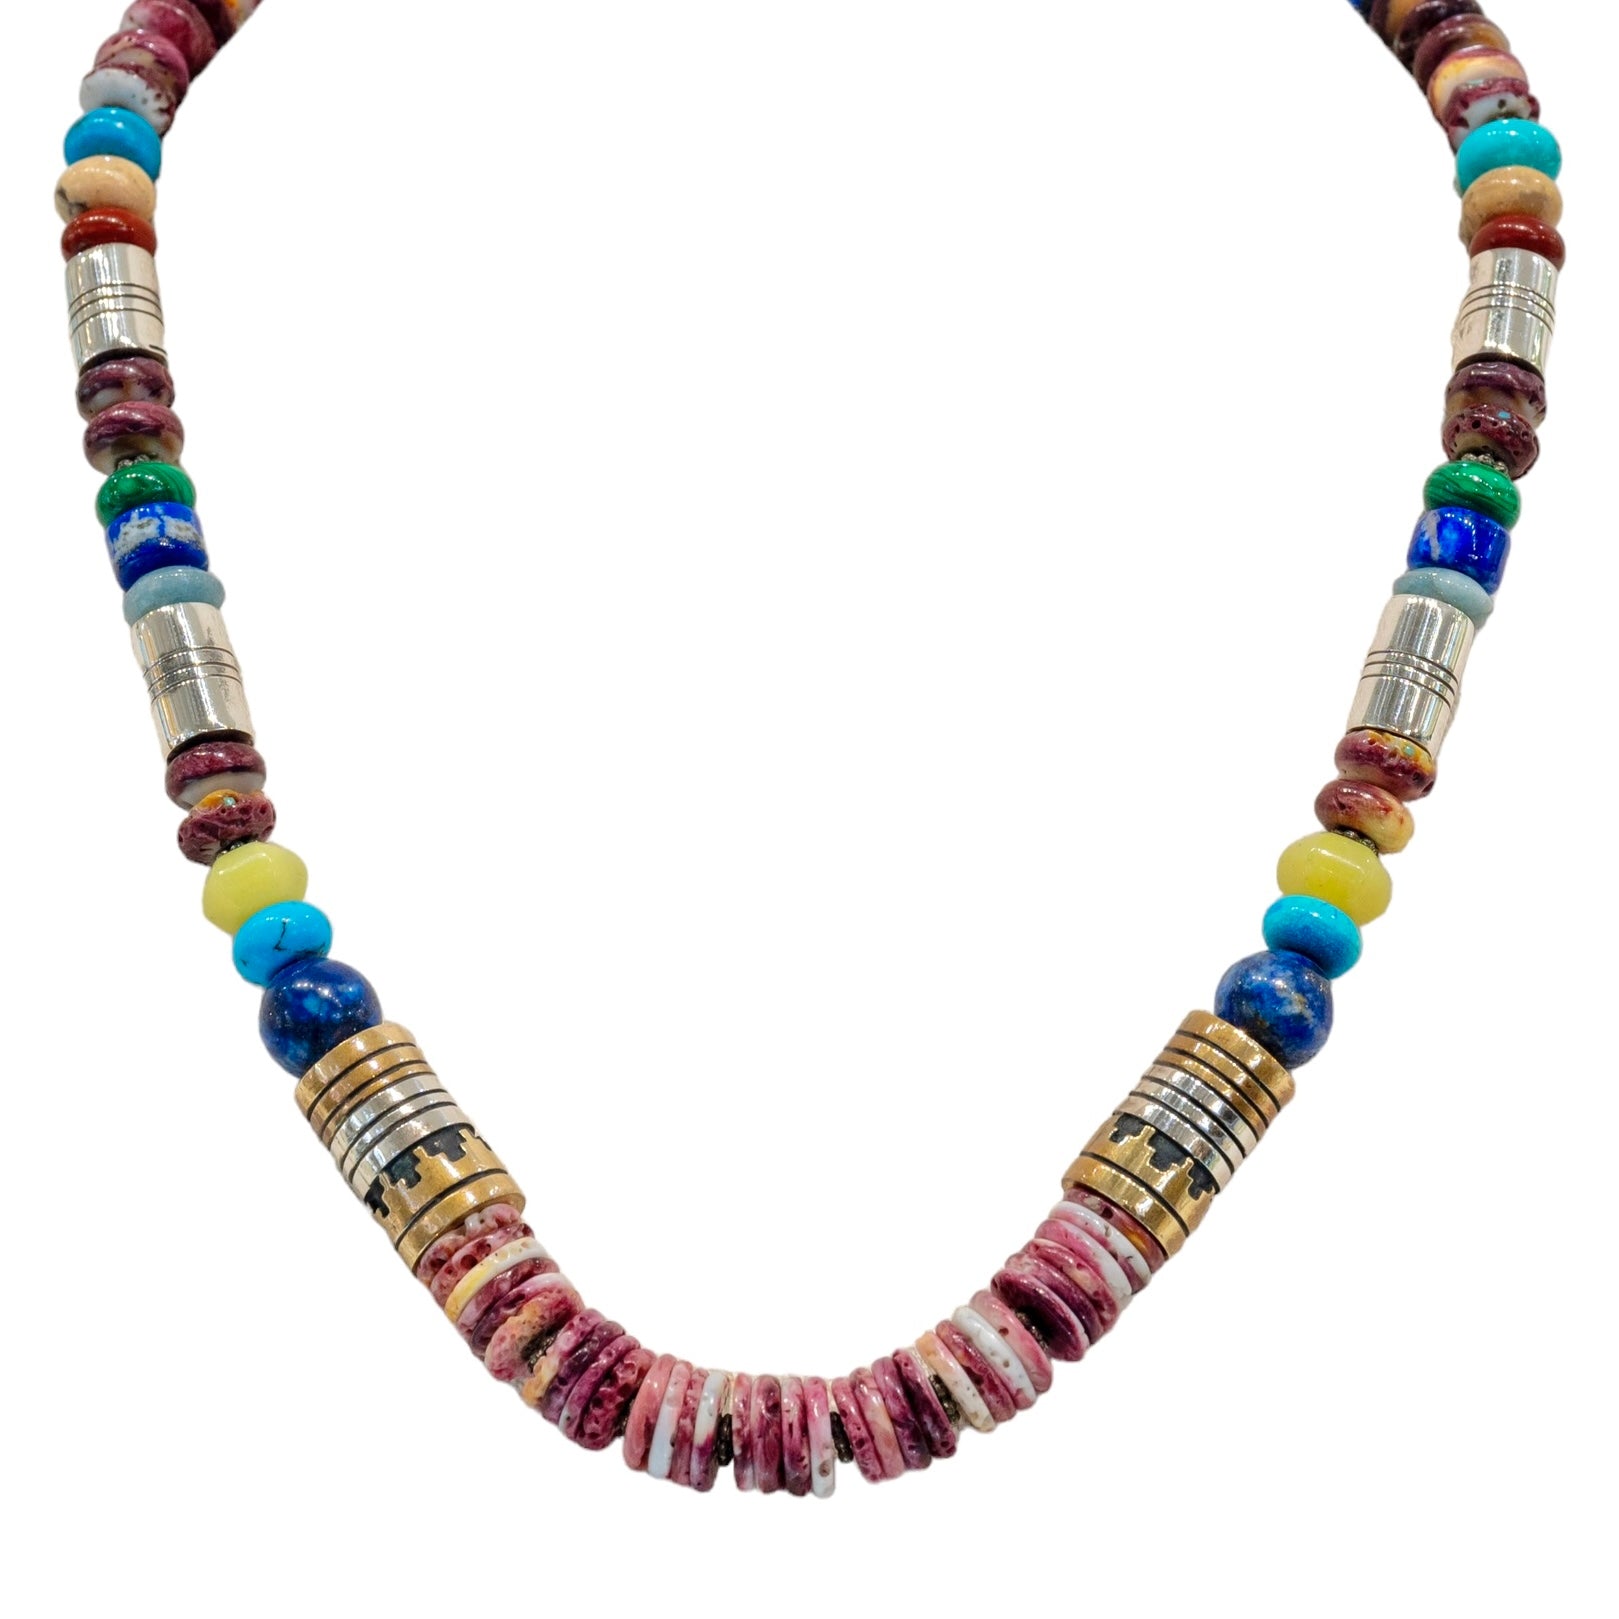 Tommy Singer Navajo Necklace available at Talisman Collection Fine Jewelers in El Dorado Hills, CA and online. Stats: Adorn yourself with a masterpiece of culture and tradition. This necklace features strikingly layered stones, handcrafted by the renowned Navajo artist, Tommy Singer. A vibrant blend of purple spiny oyster shell, lapis, turquoise, and pale serpentine, delicately accented by sterling silver and red brass, perfectly symbolizes the rich cultural heritage of the Southwest.